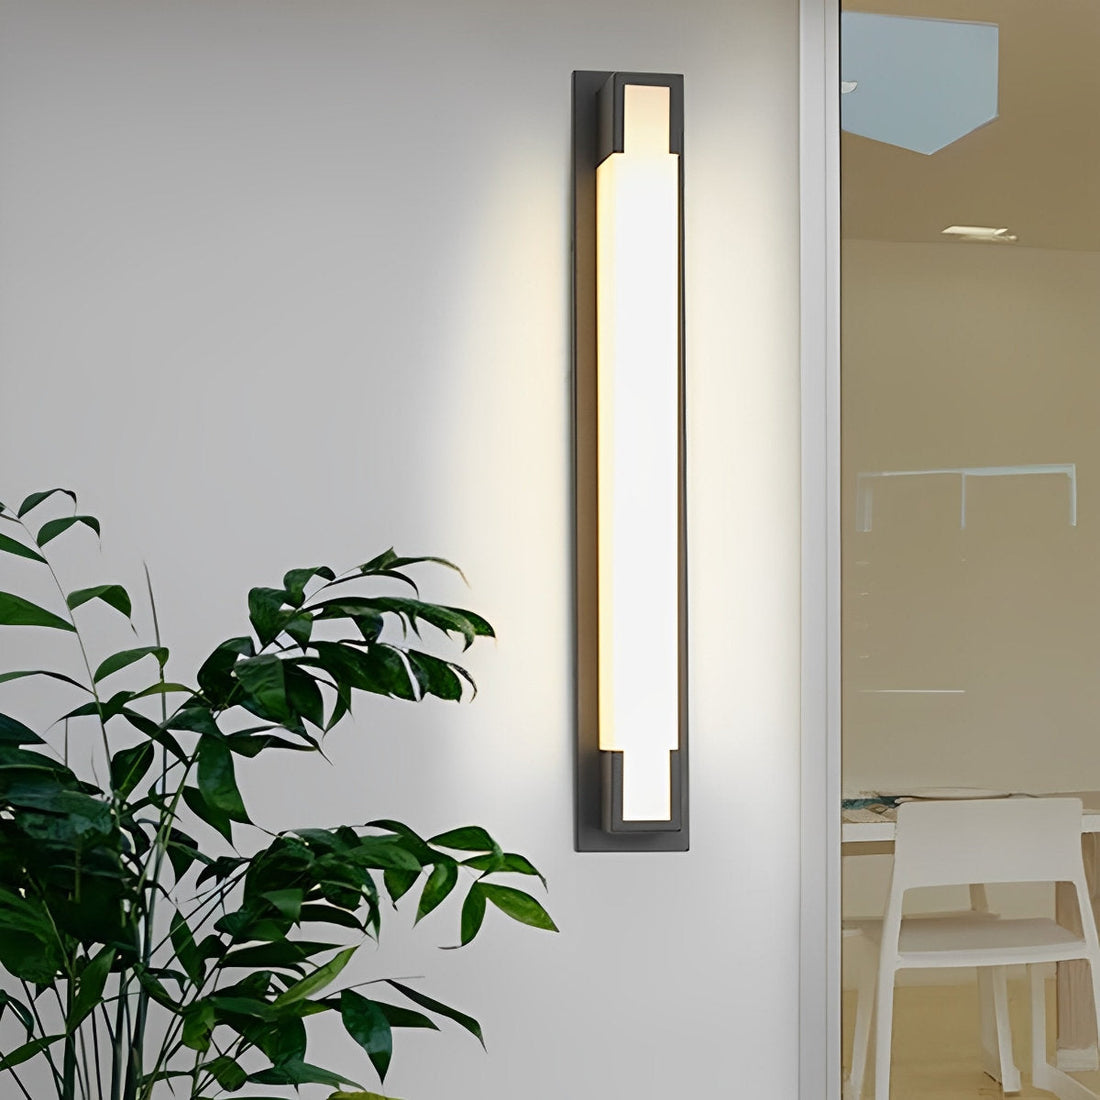 Retro Linear Strip LED Wall Sconce Outdoor Wall Mount Light Exterior Wall Lighting Fixtures - Flyachilles